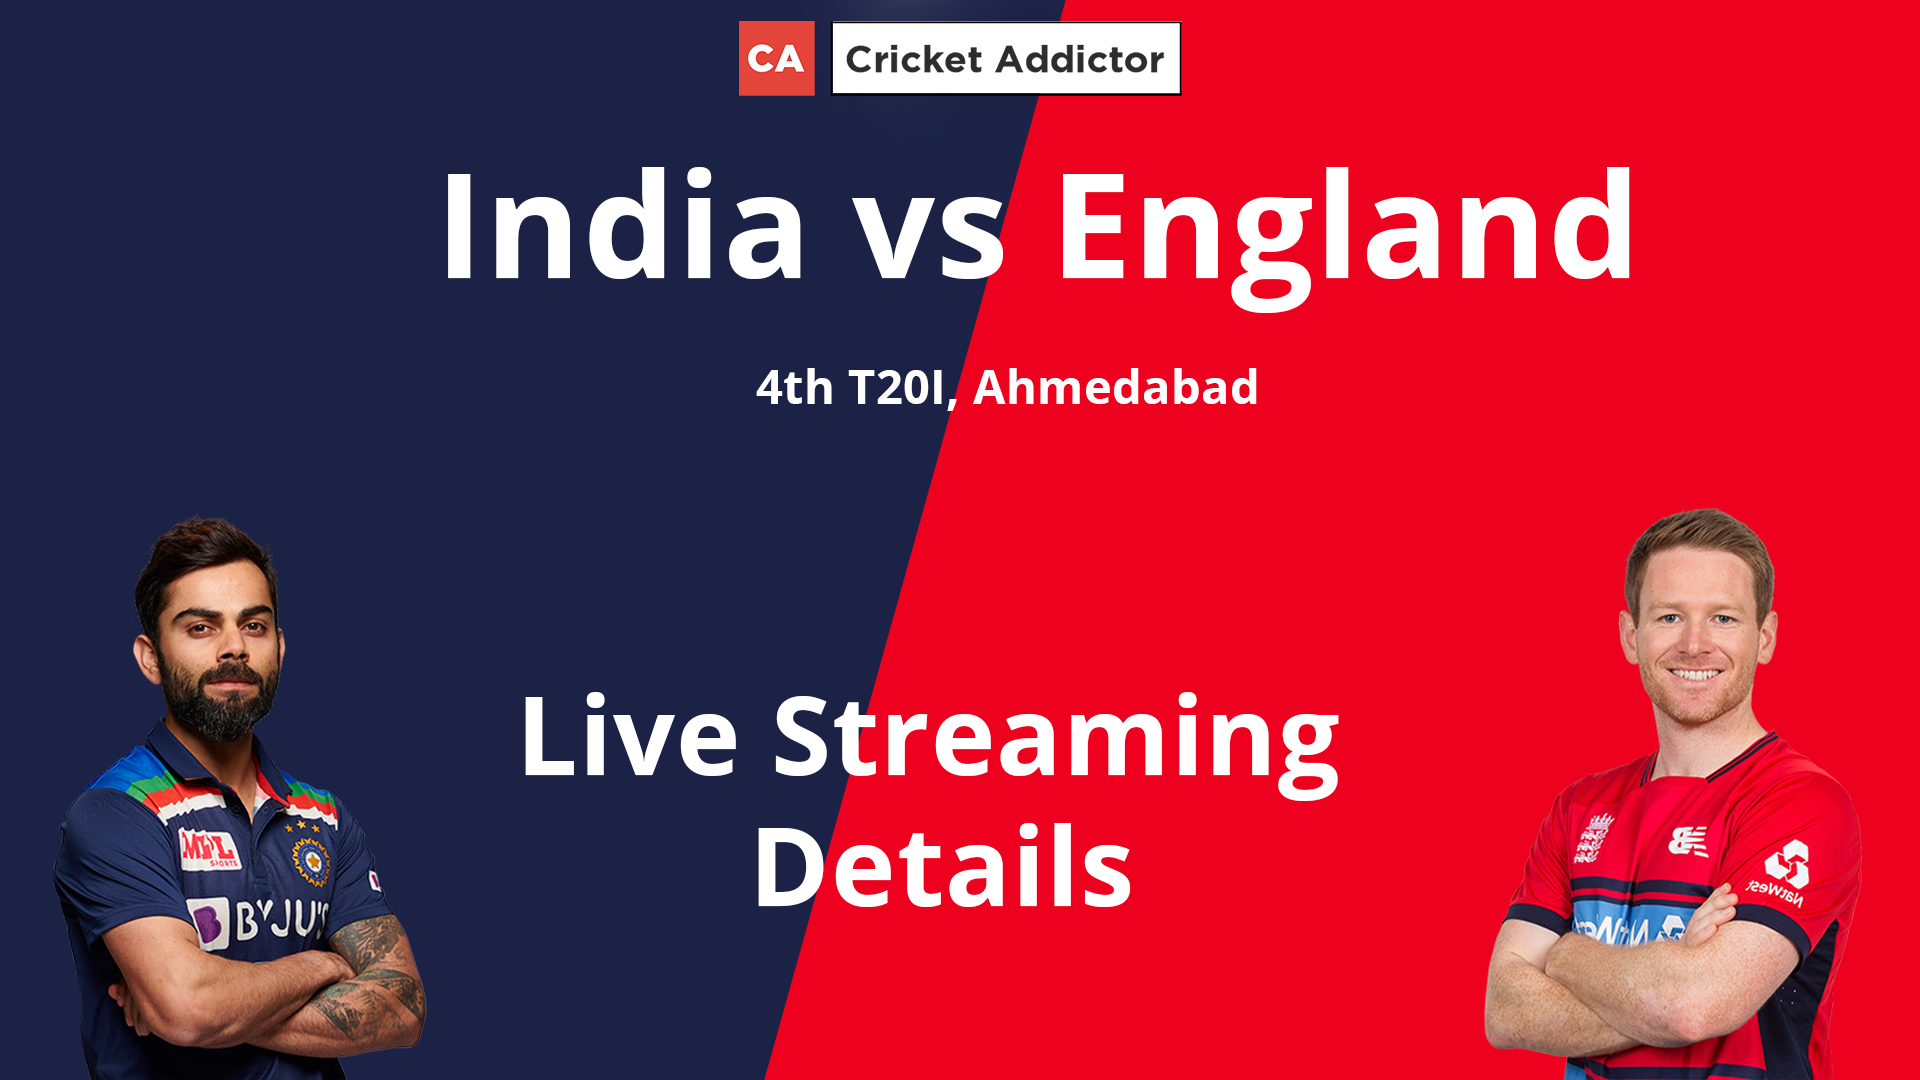 India vs England 2021, 4th T20I When And Where To Watch, Live Streaming Details